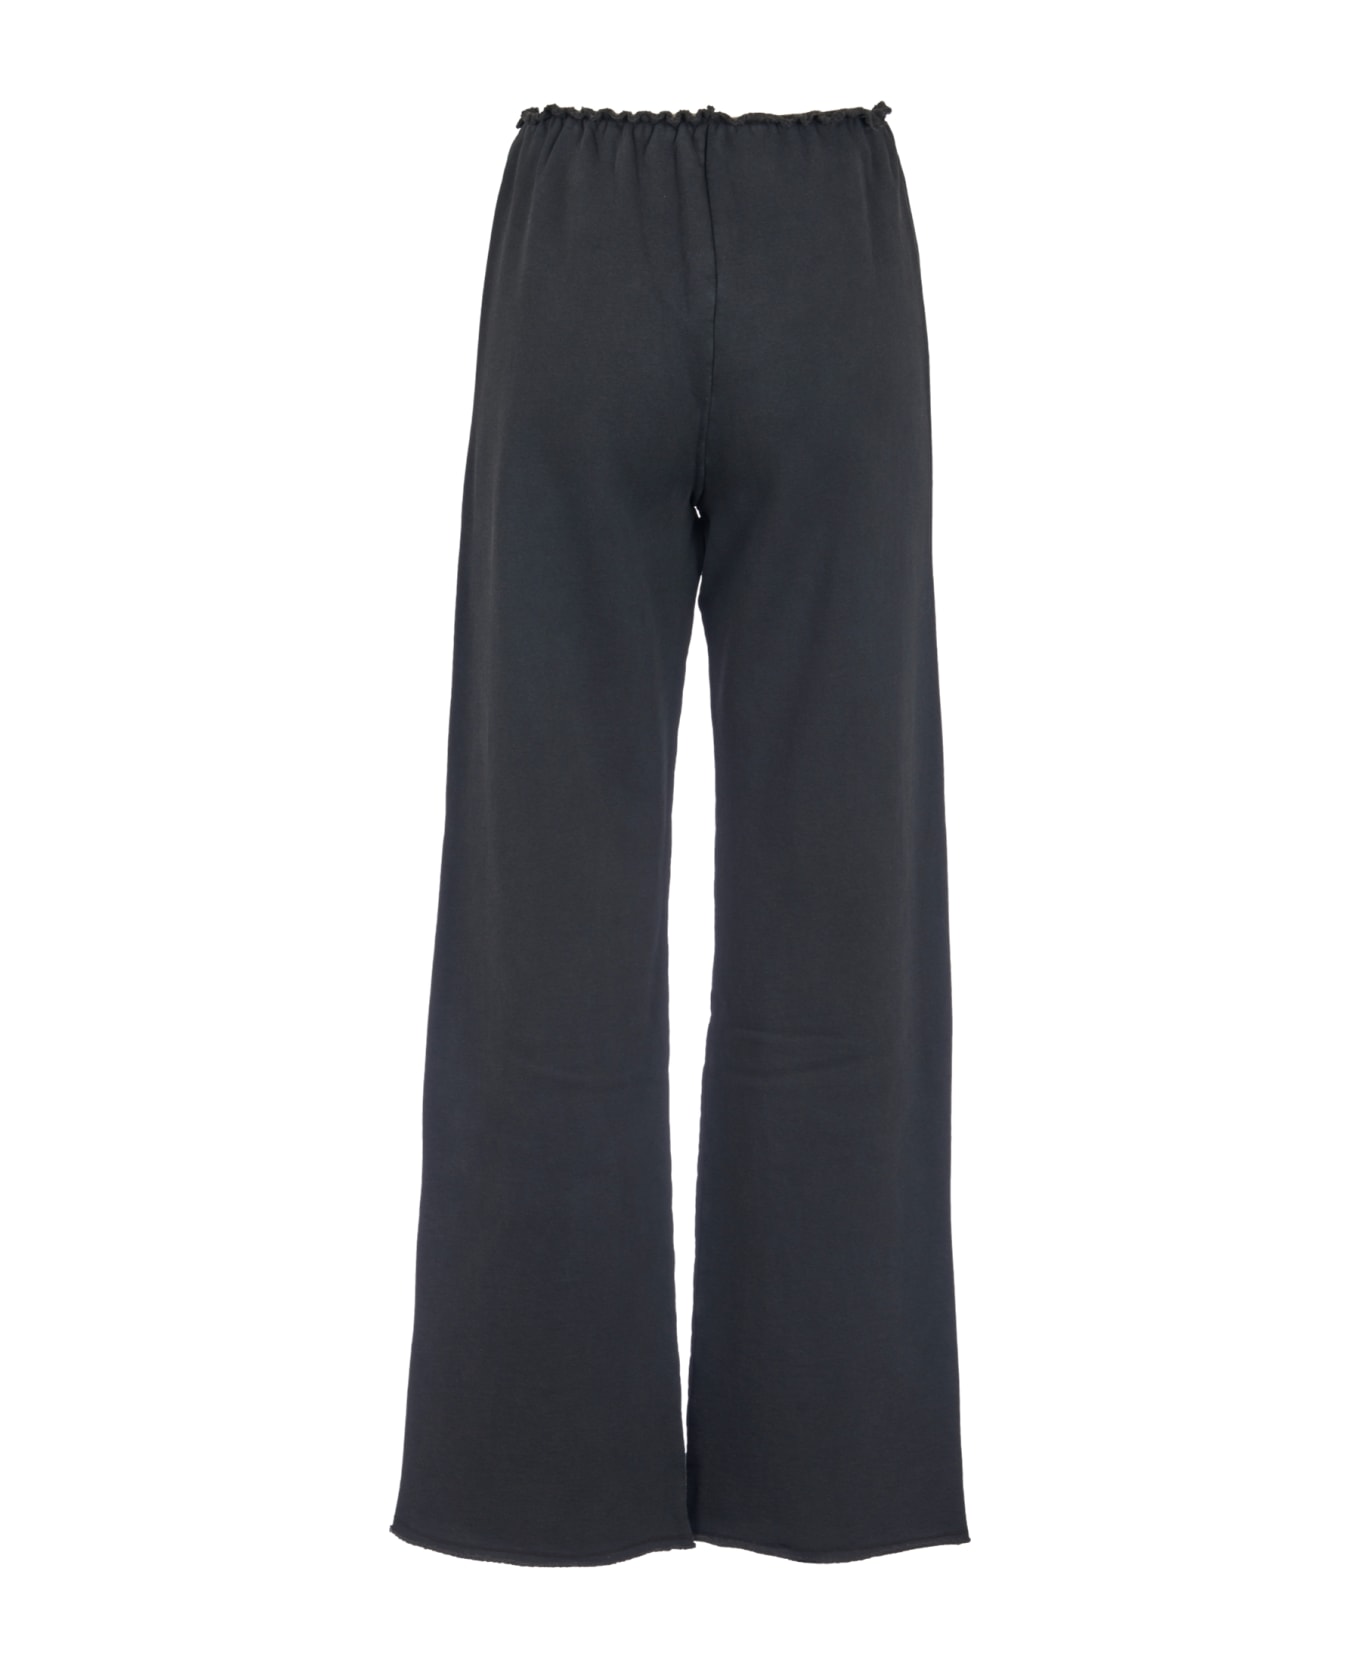 Rotate by Birger Christensen Zip Trousers - Black ボトムス